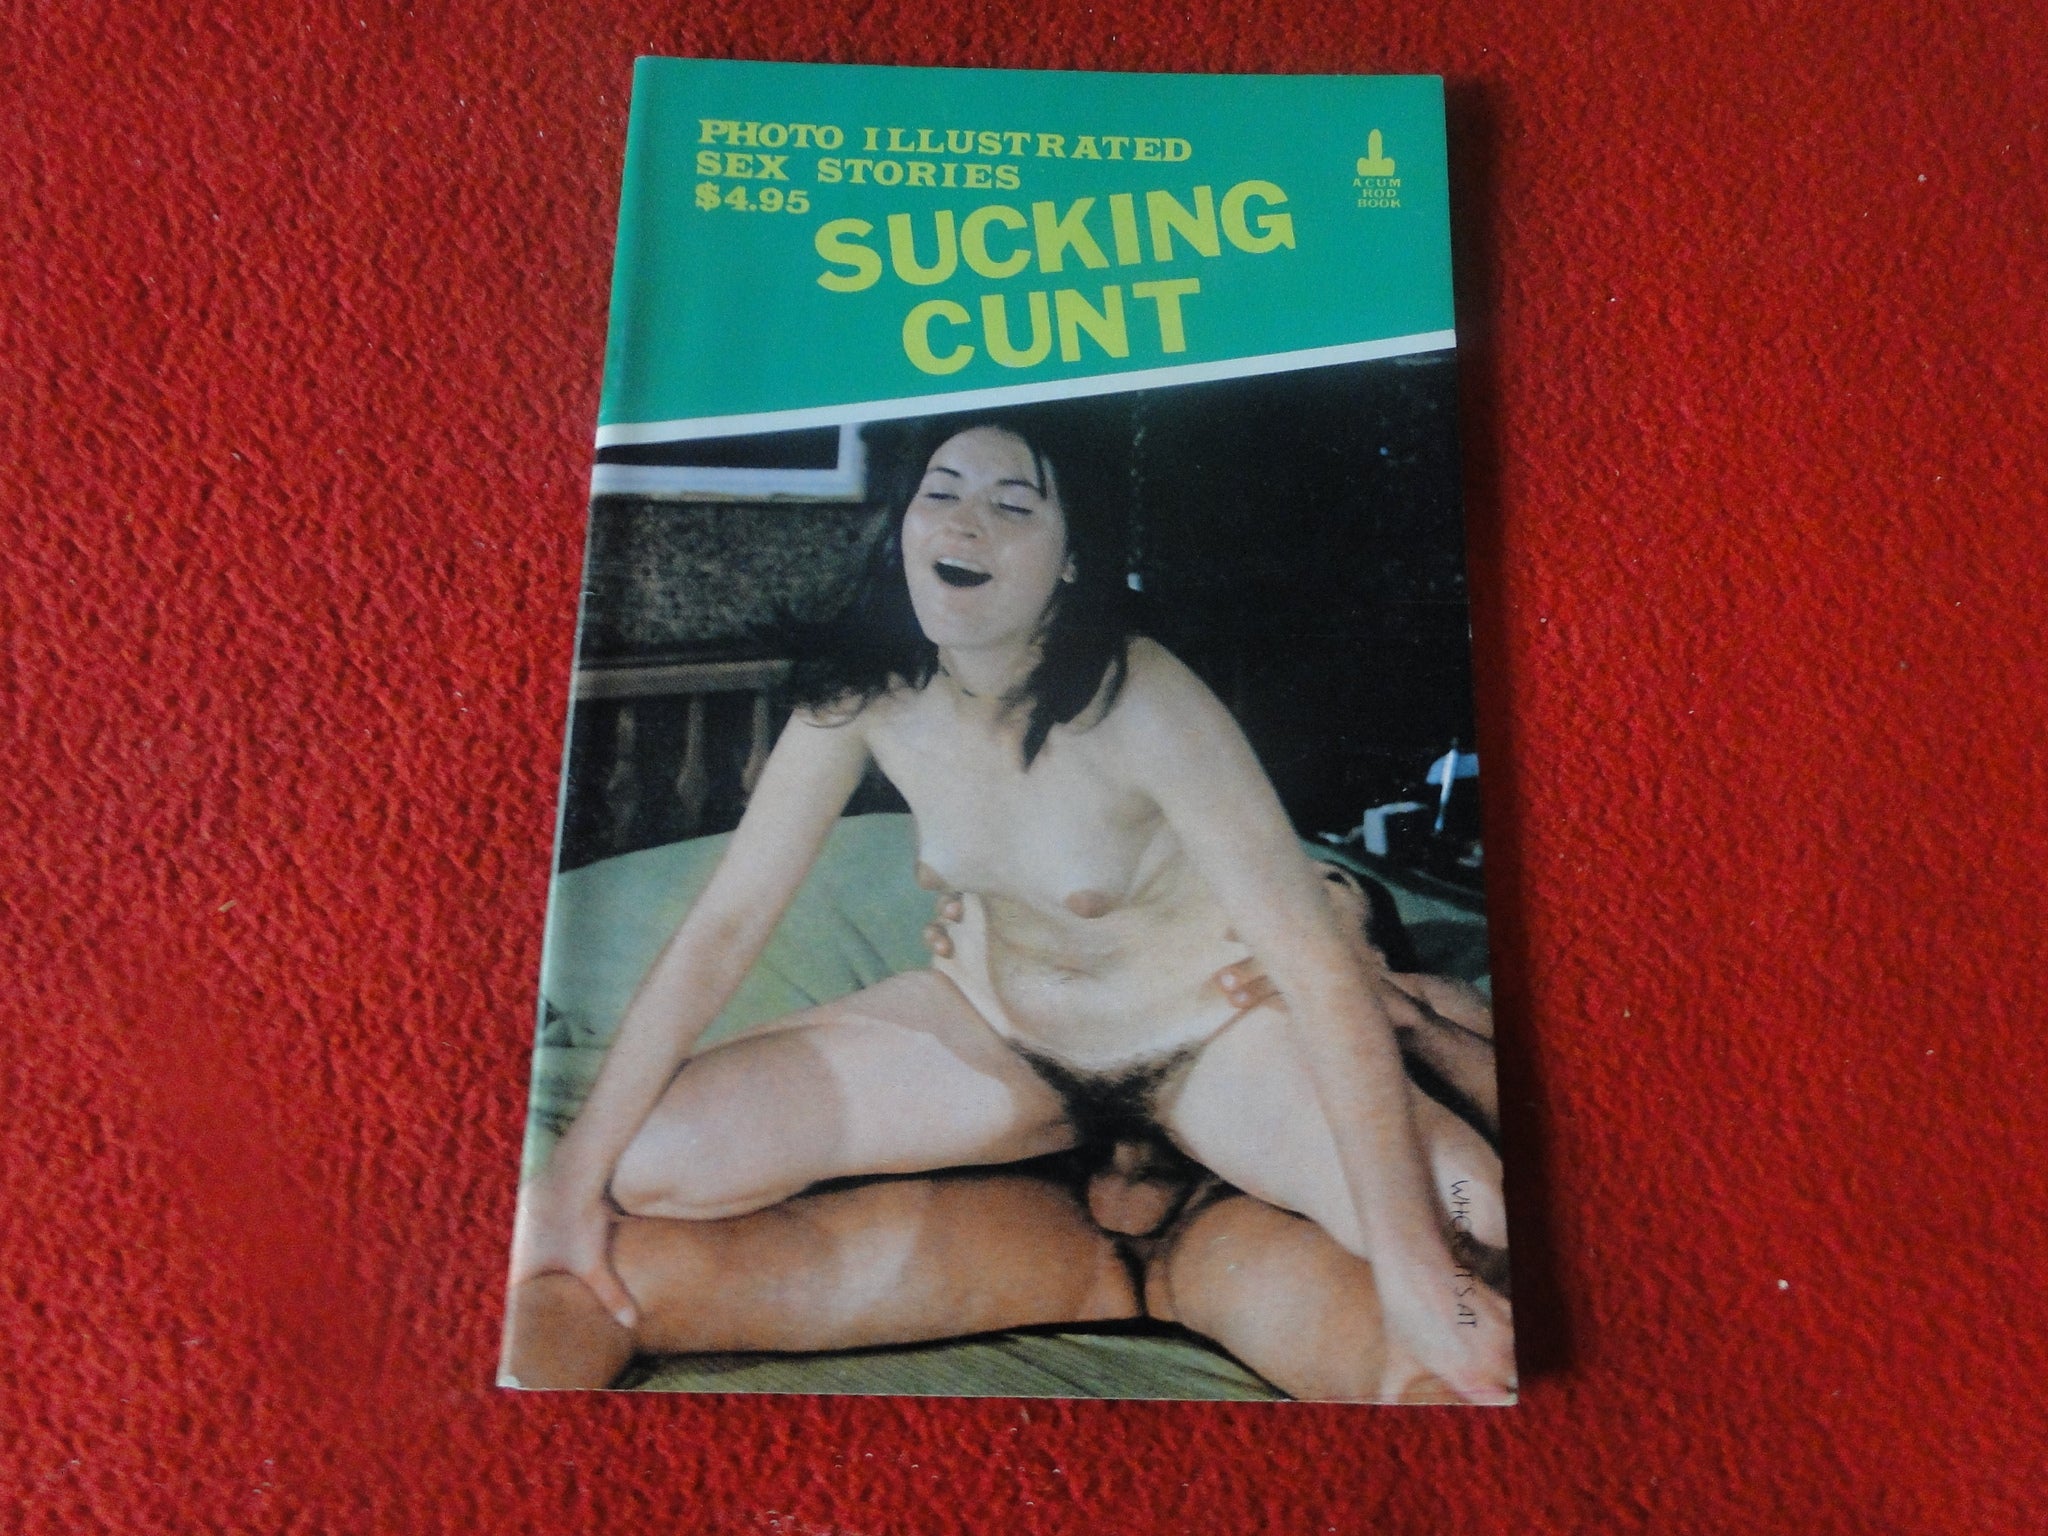 Vintage Erotic Paperback Book/Journal/Magazine Sucking Cunt with Photo pic photo